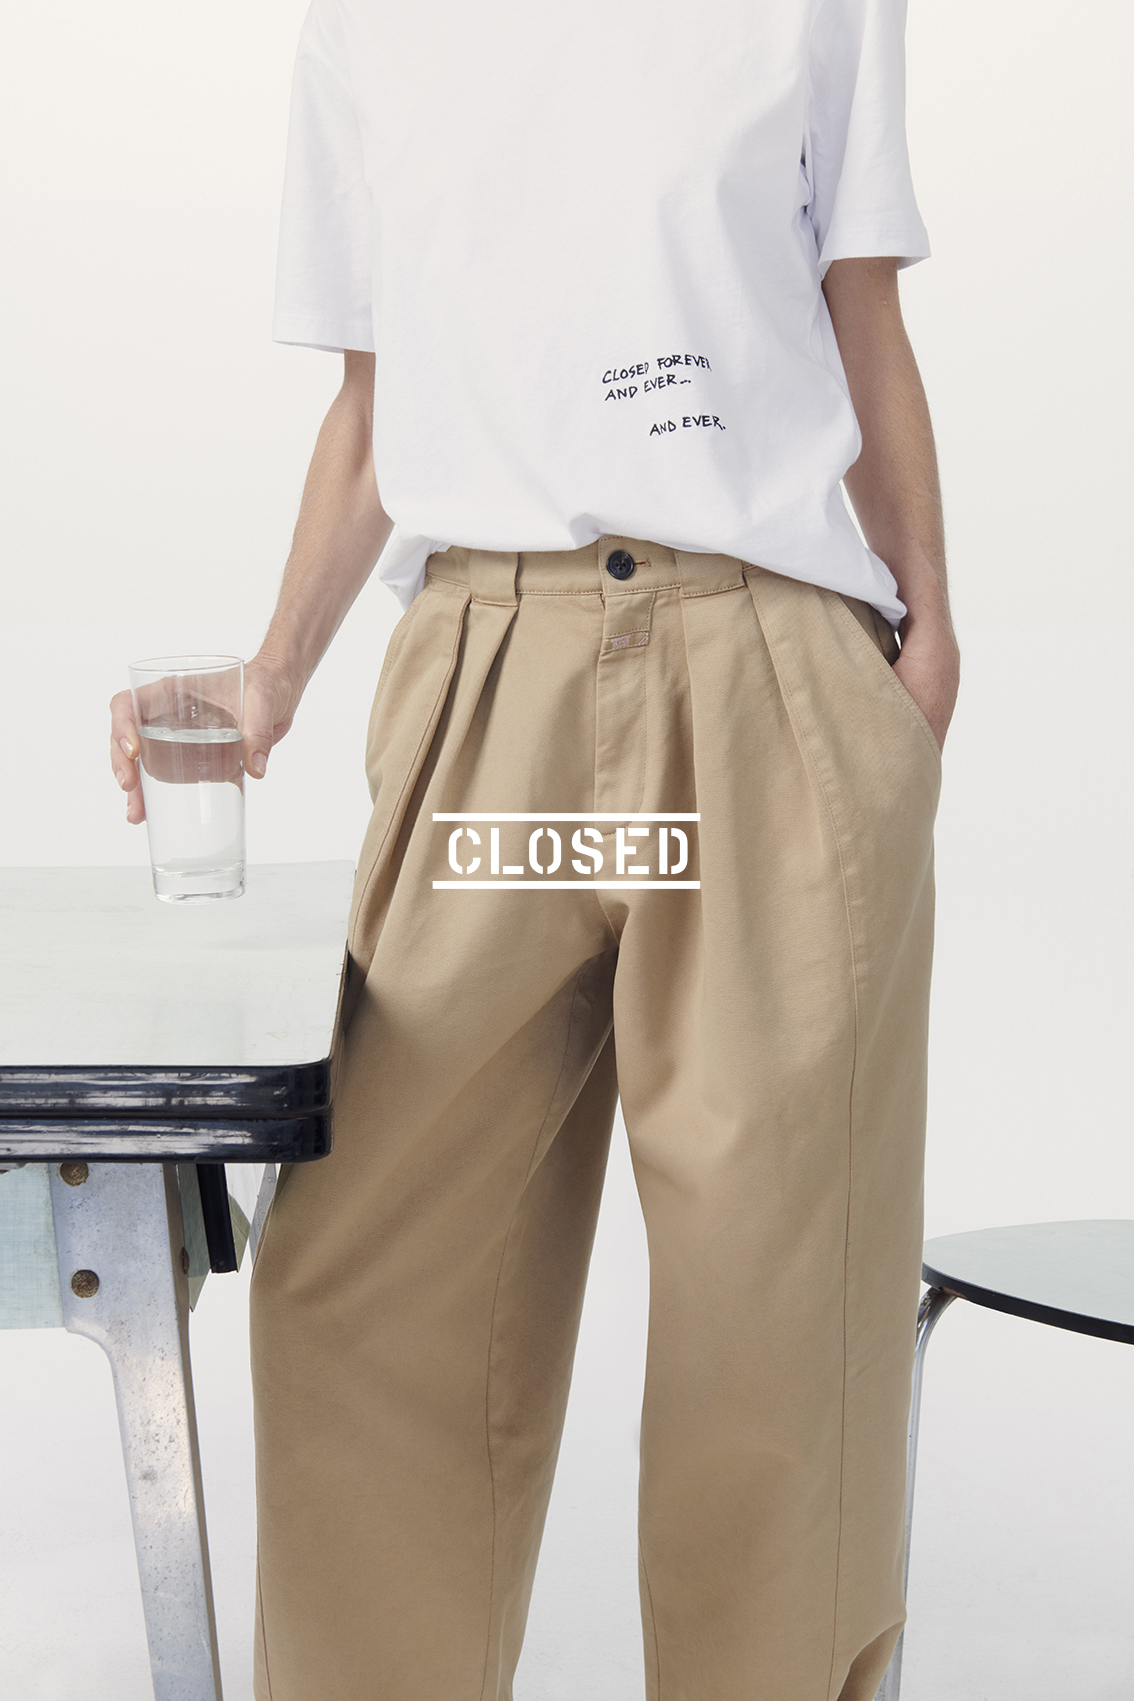 Michael Philouze | Advertising | CLOSED summer 21 campaign | 84